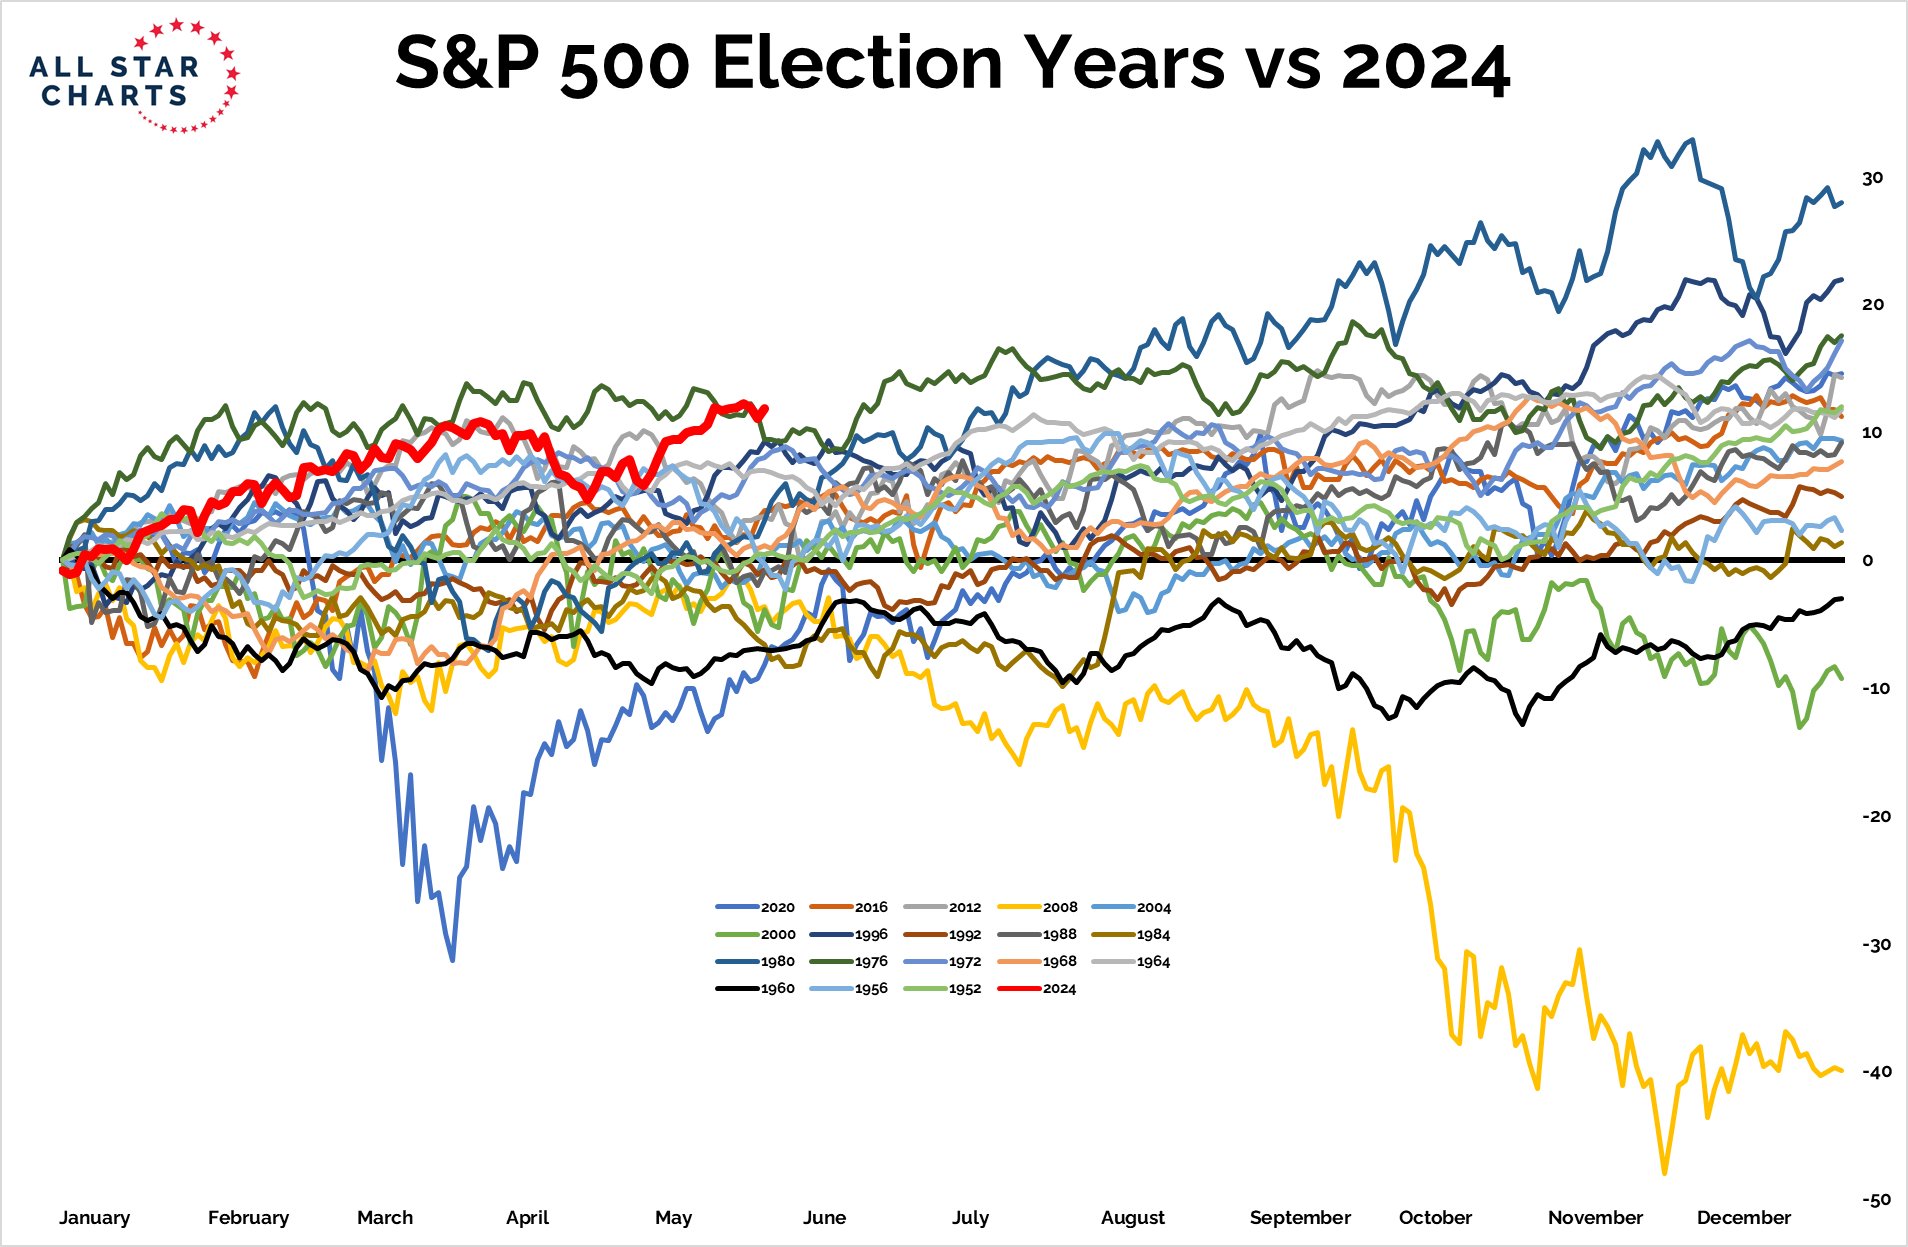 S&P 500 Election Years Vs. 2024